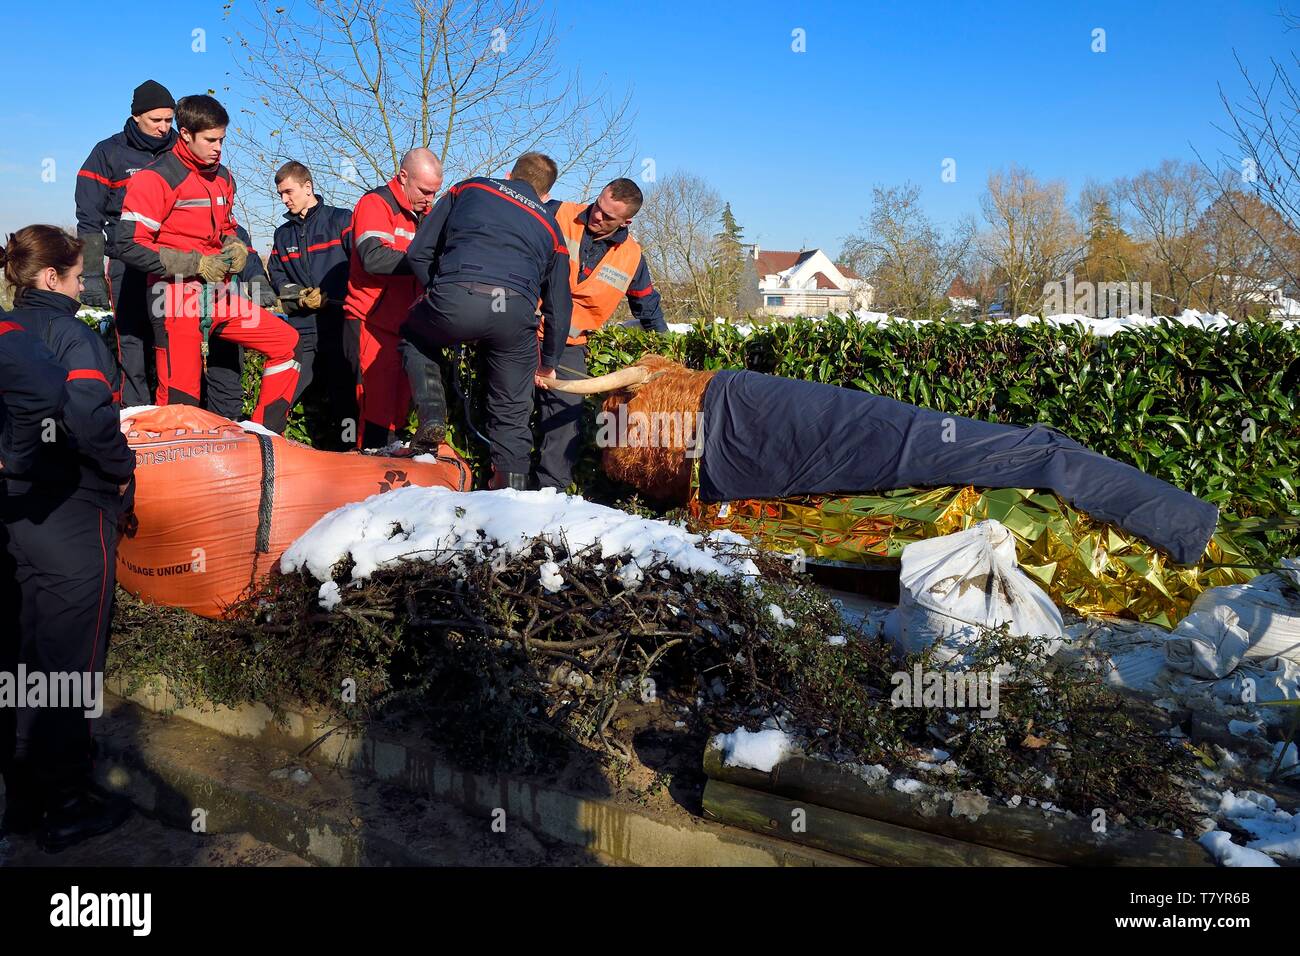 France, Val de Marne, the Marne riverside, Le Perreux sur Marne, a Highland Cow rescued from drowning in the Marne by firefighters Stock Photo